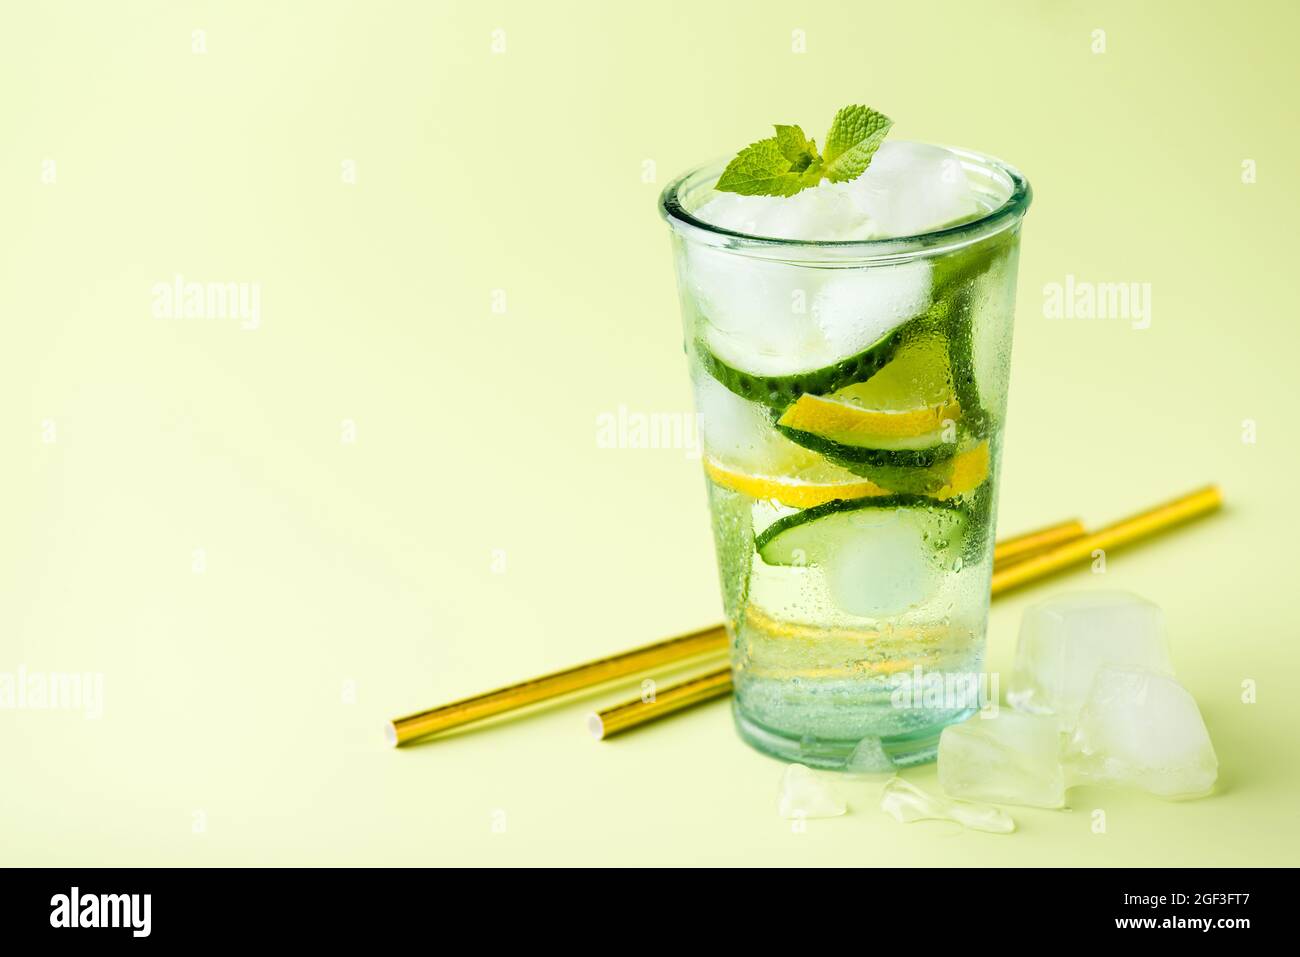 Detox cucumber lemon water in glass. Closeup view copy space. Weight loss concept Stock Photo